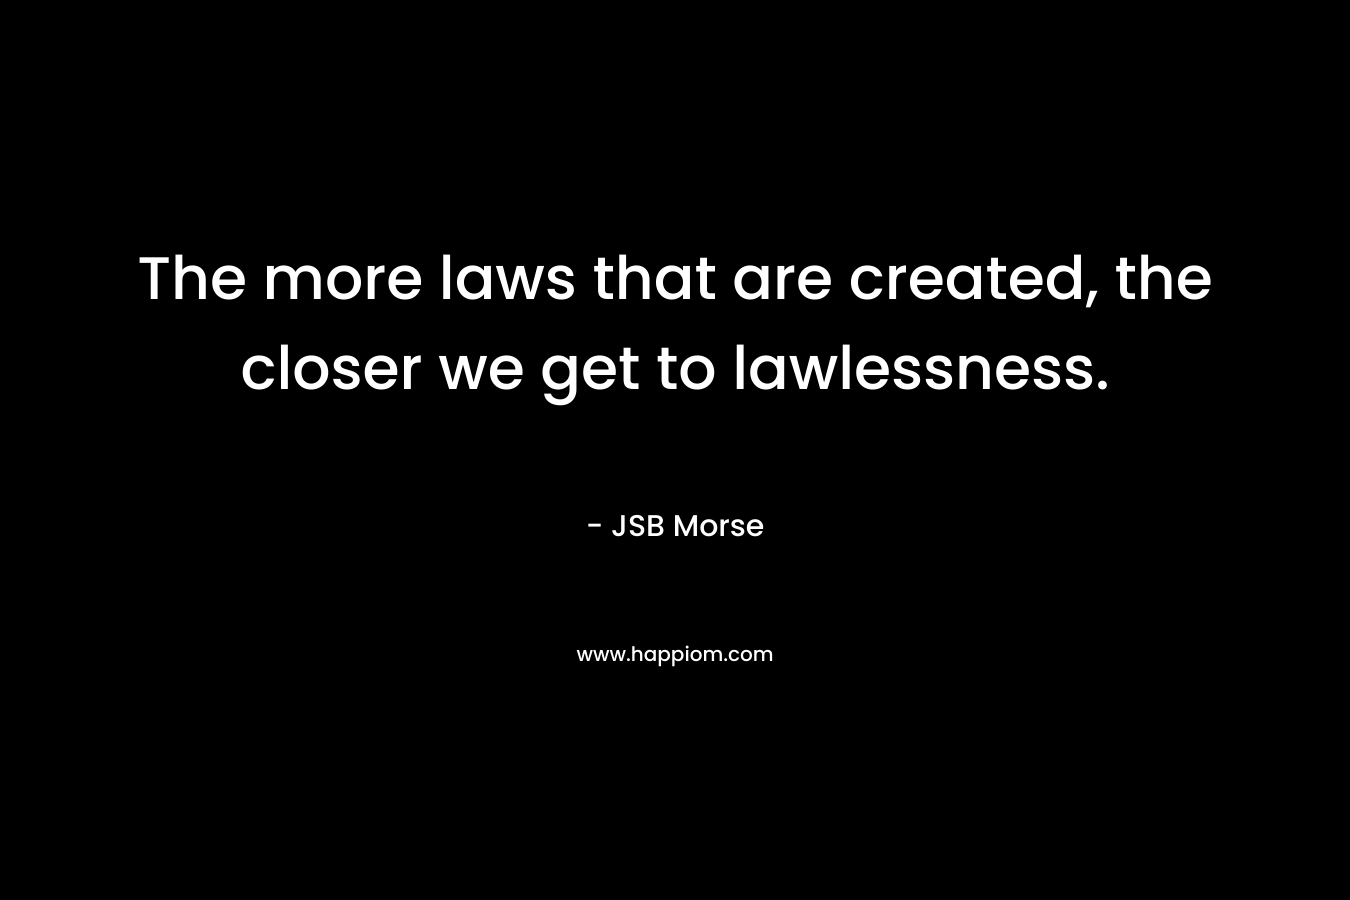 The more laws that are created, the closer we get to lawlessness. – JSB Morse